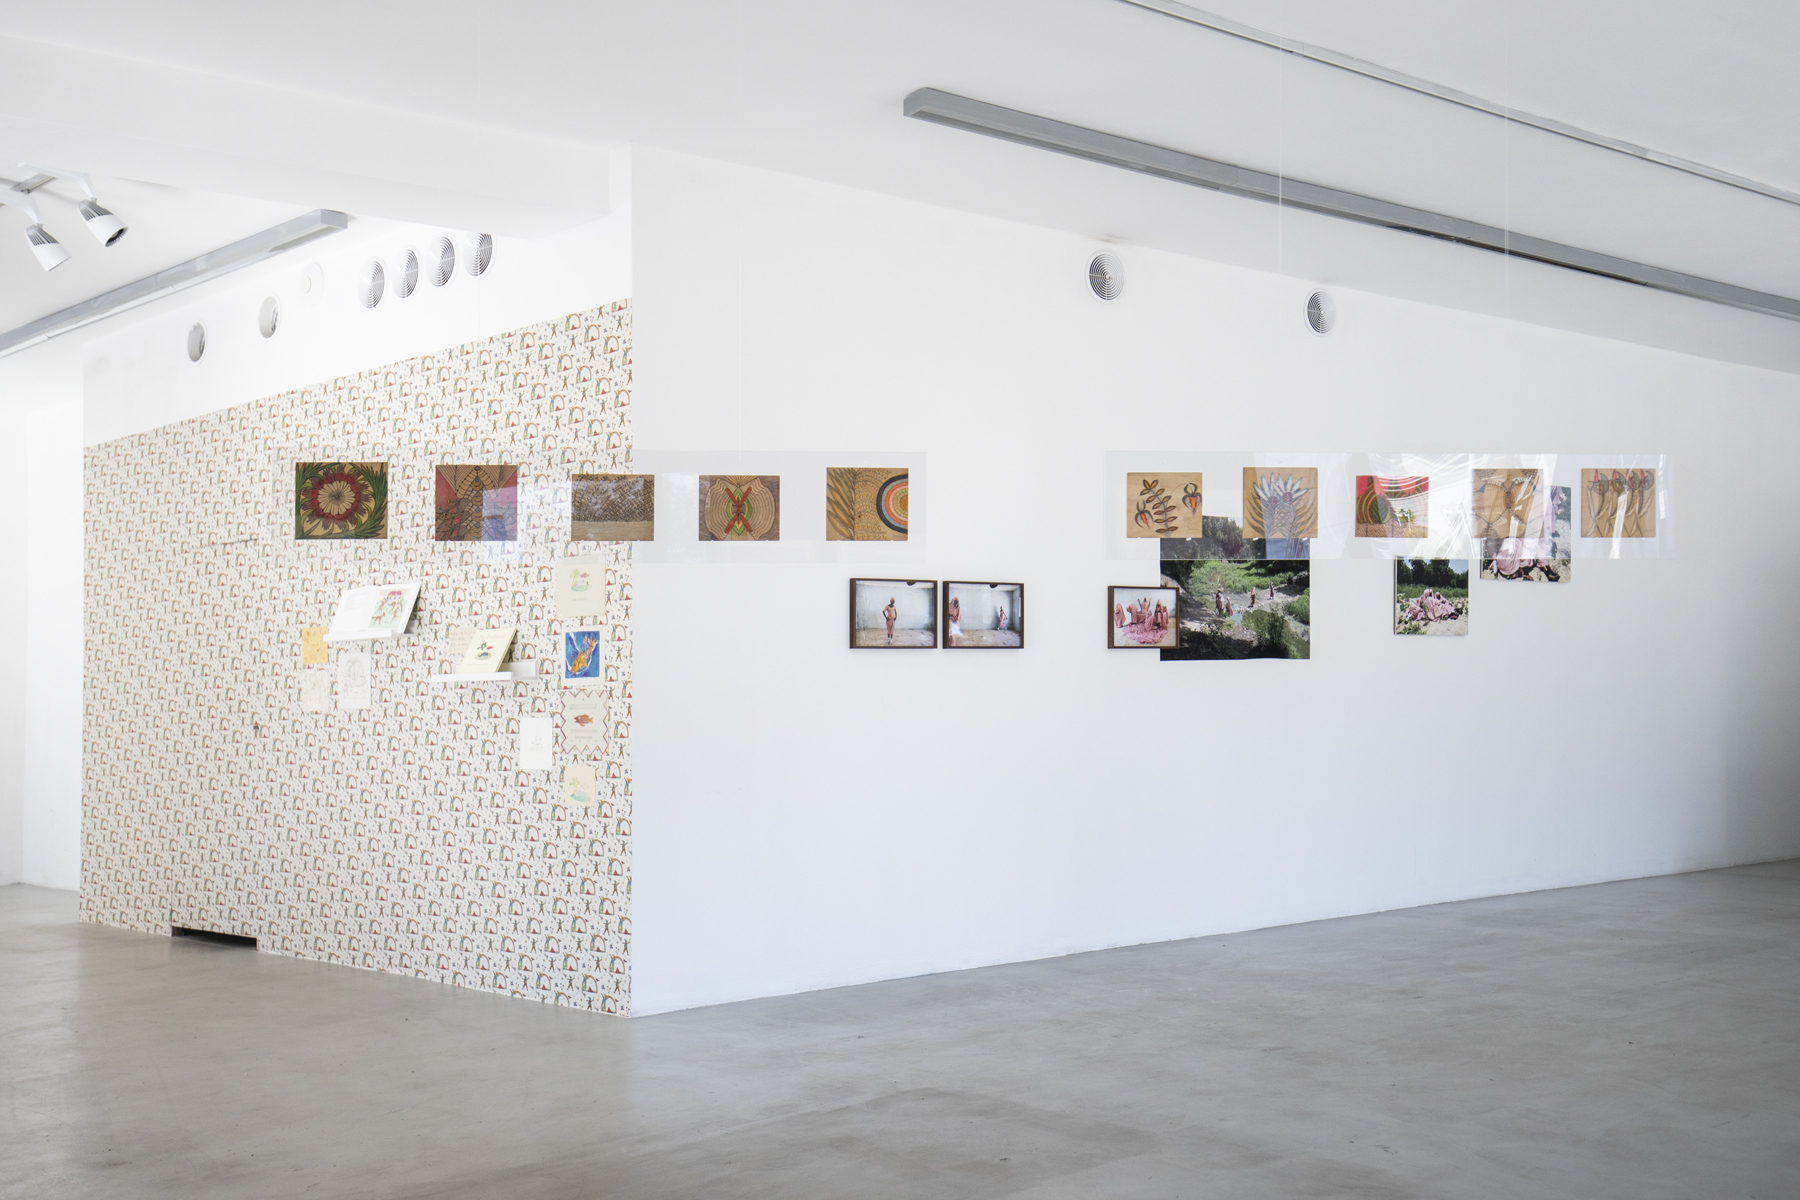 Installation view featuring works from Tom Seidmann-Freud, Anna ZemÃ¡nkovÃ¡ & Rahima Gambo  (left to right)